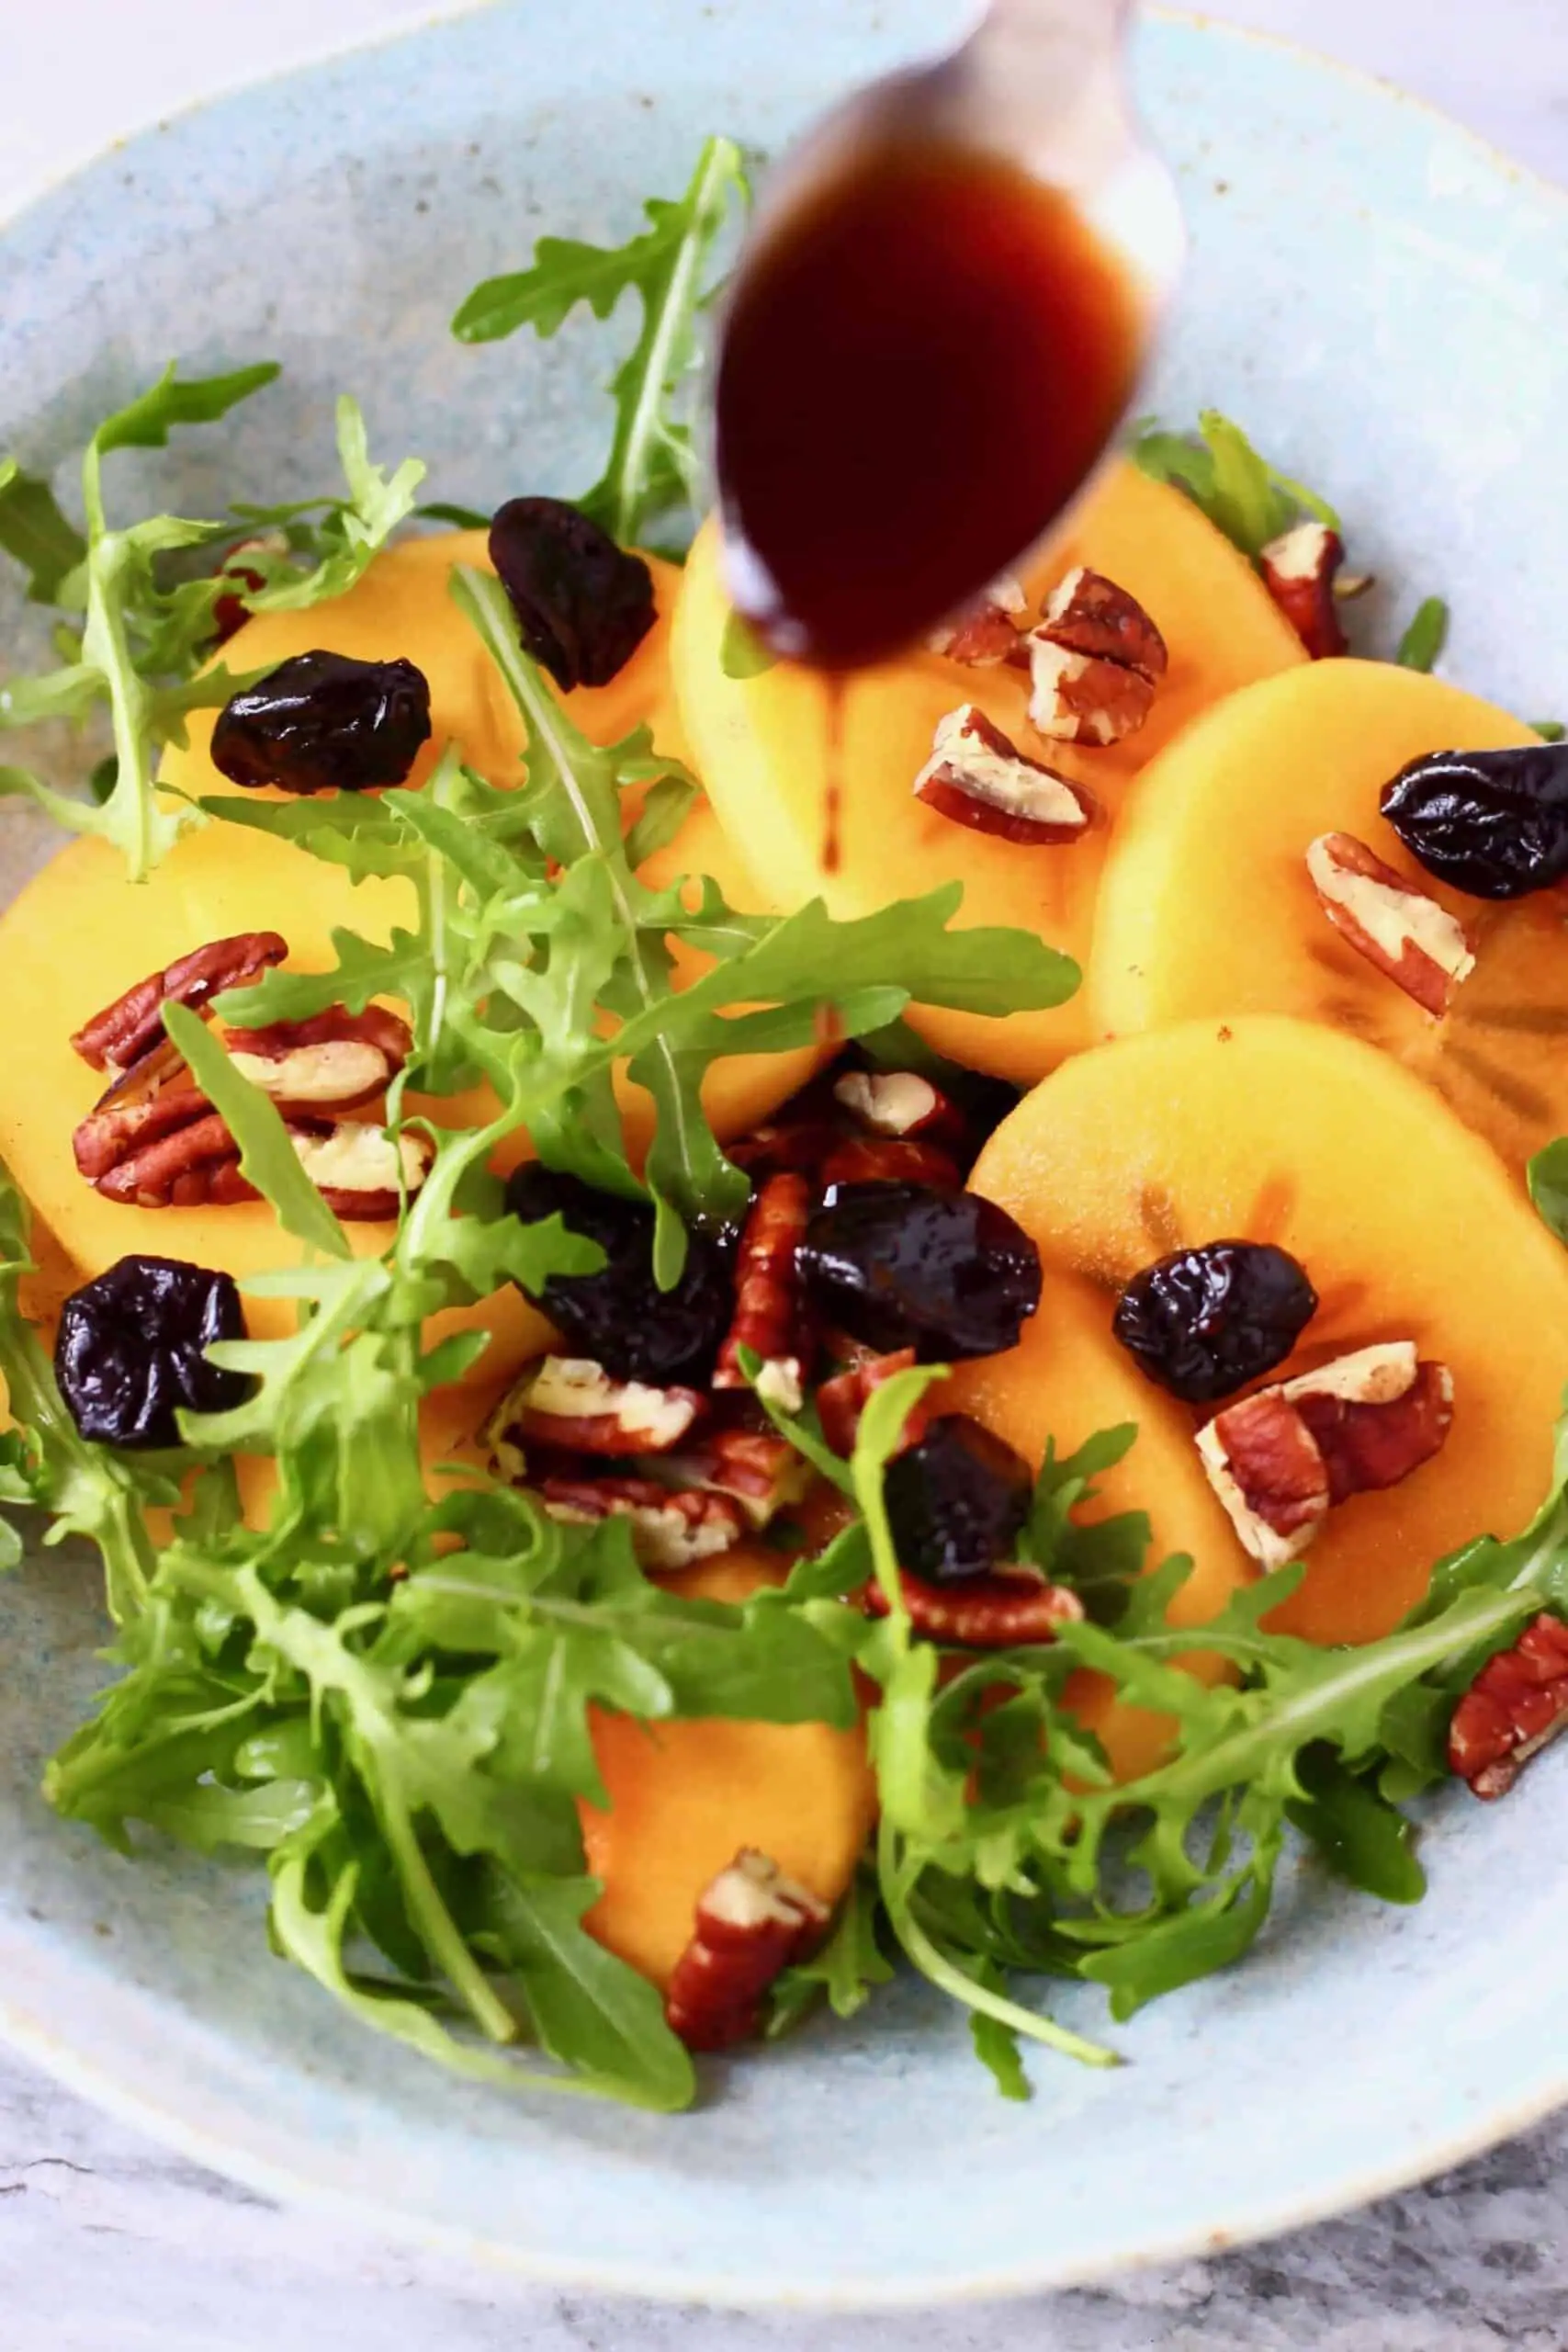 Persimmon salad with sliced persimmon, dried cherries, chopped pecan nuts and rocket in a bowl with a spoon pouring brown dressing over it